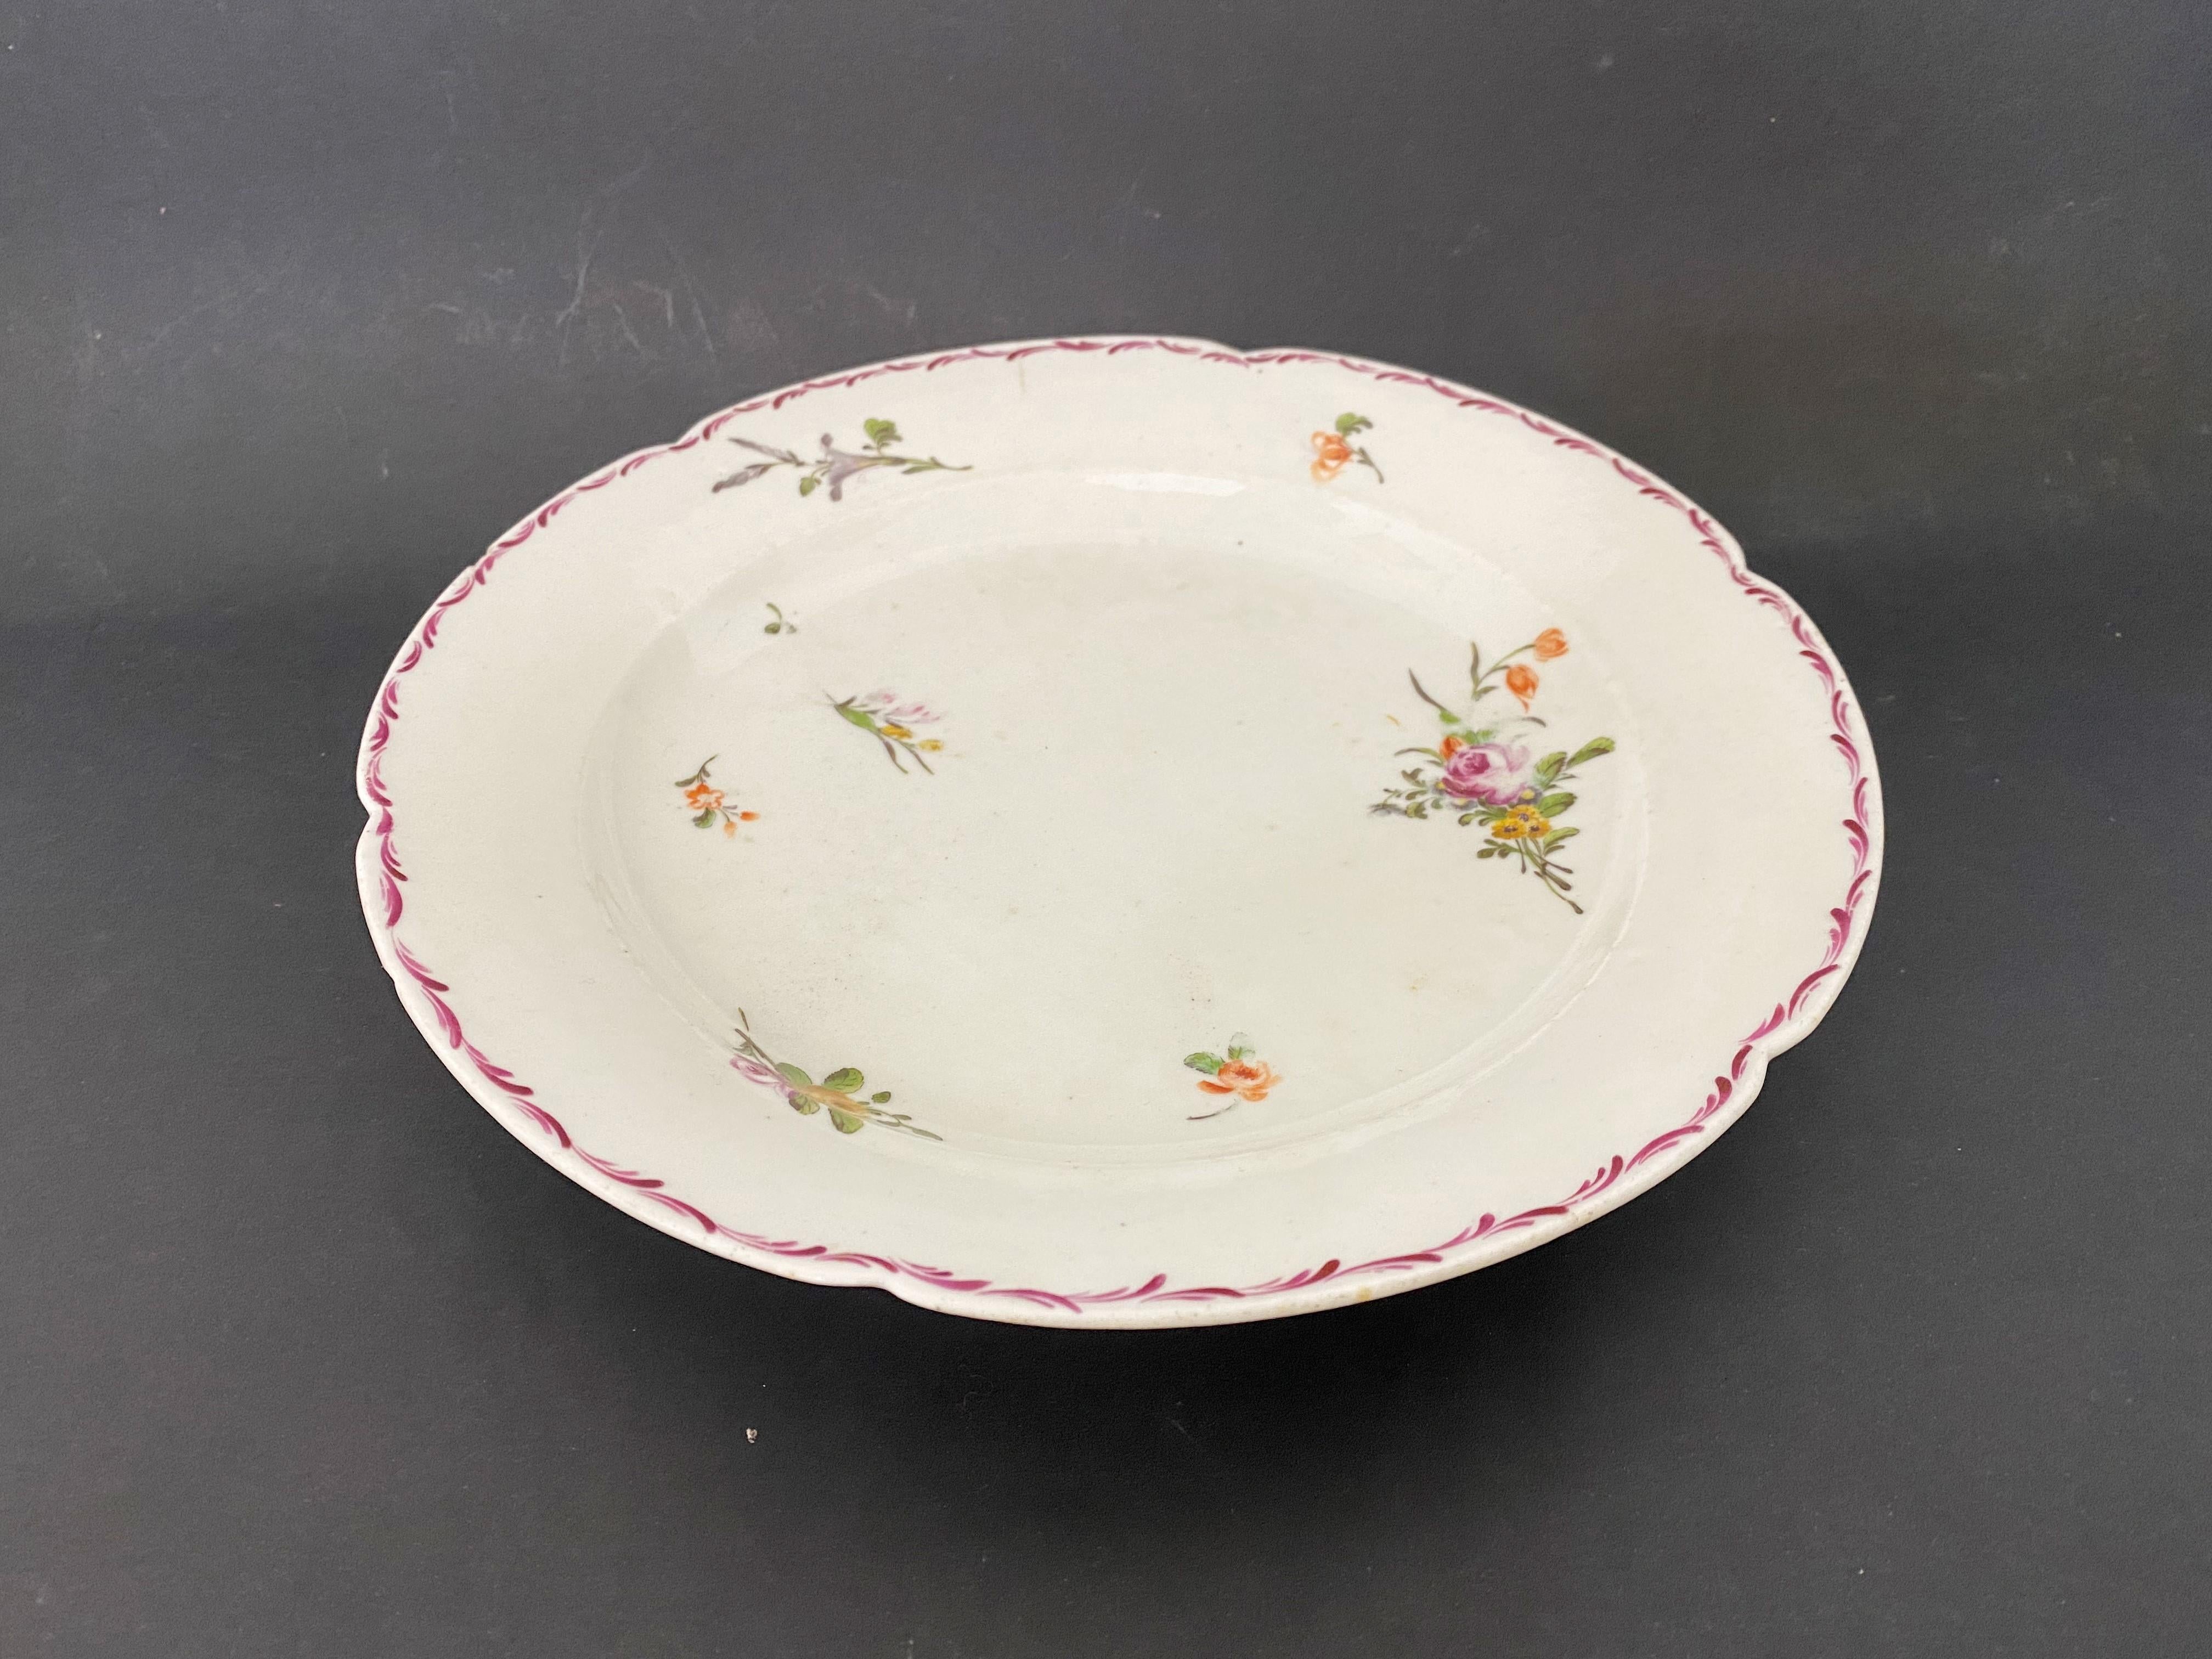 Beautiful plate of the Compagnie des Indes from the Qianlong period, 18th century. This porcelain soup plate, has very beautiful hand painted decorations, representing yellow and pink roses, buds and various plants. The contour of the plate is